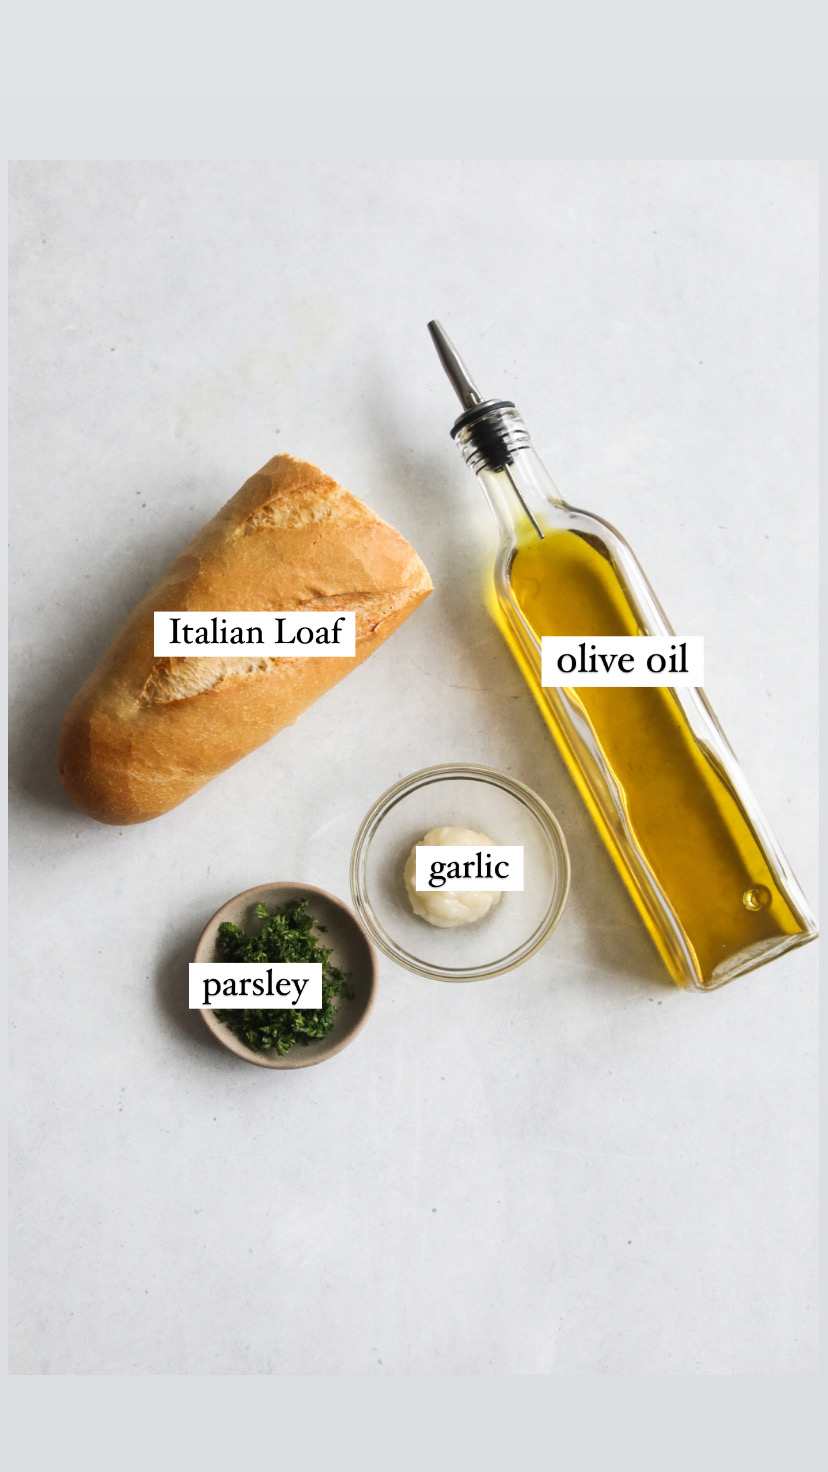 Crouton ingredients in a flatlay with ingredient labels.